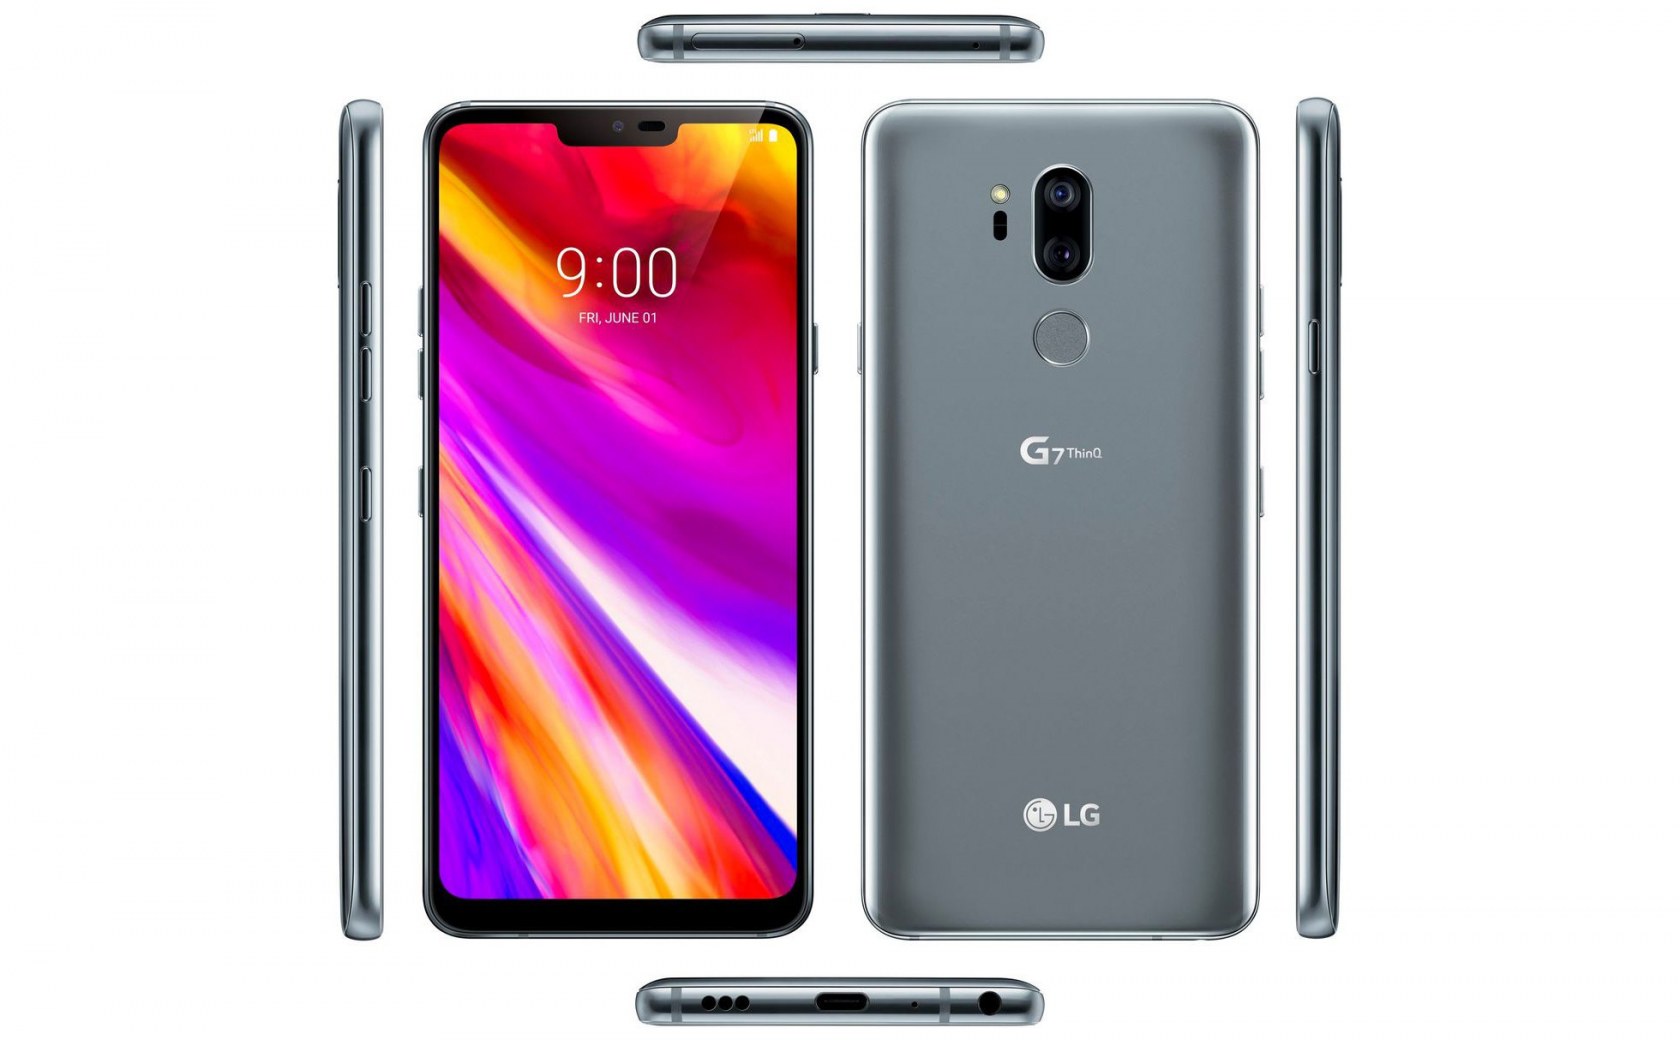 The LG G7 ThinQ is supposedly ten times louder than other smartphones and has double the bass